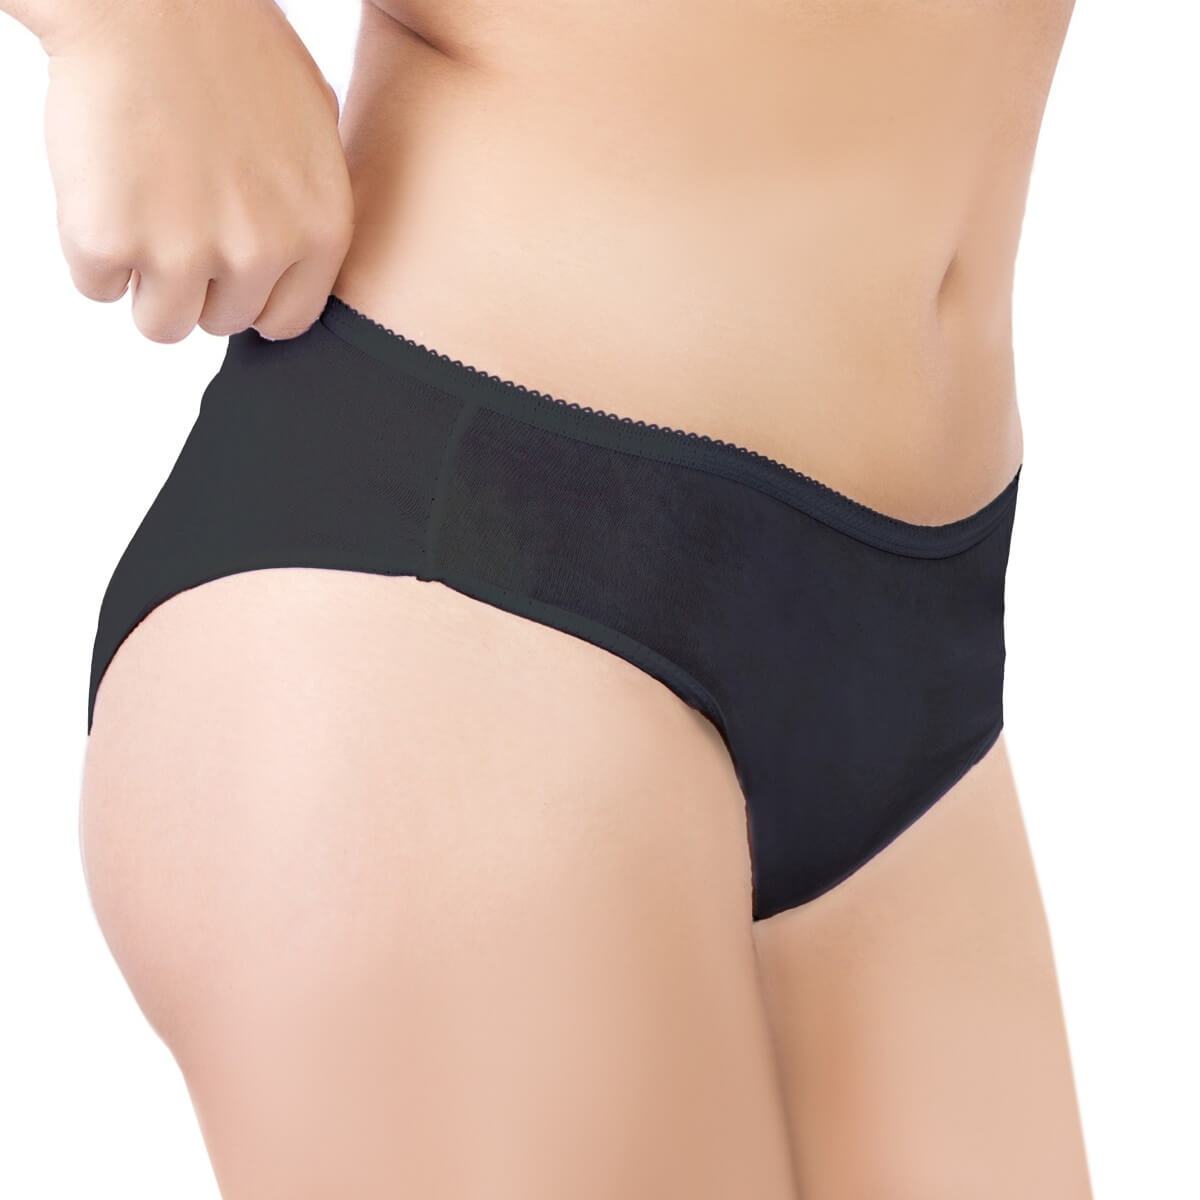 Disposable black cotton knickers pants briefs for hospital